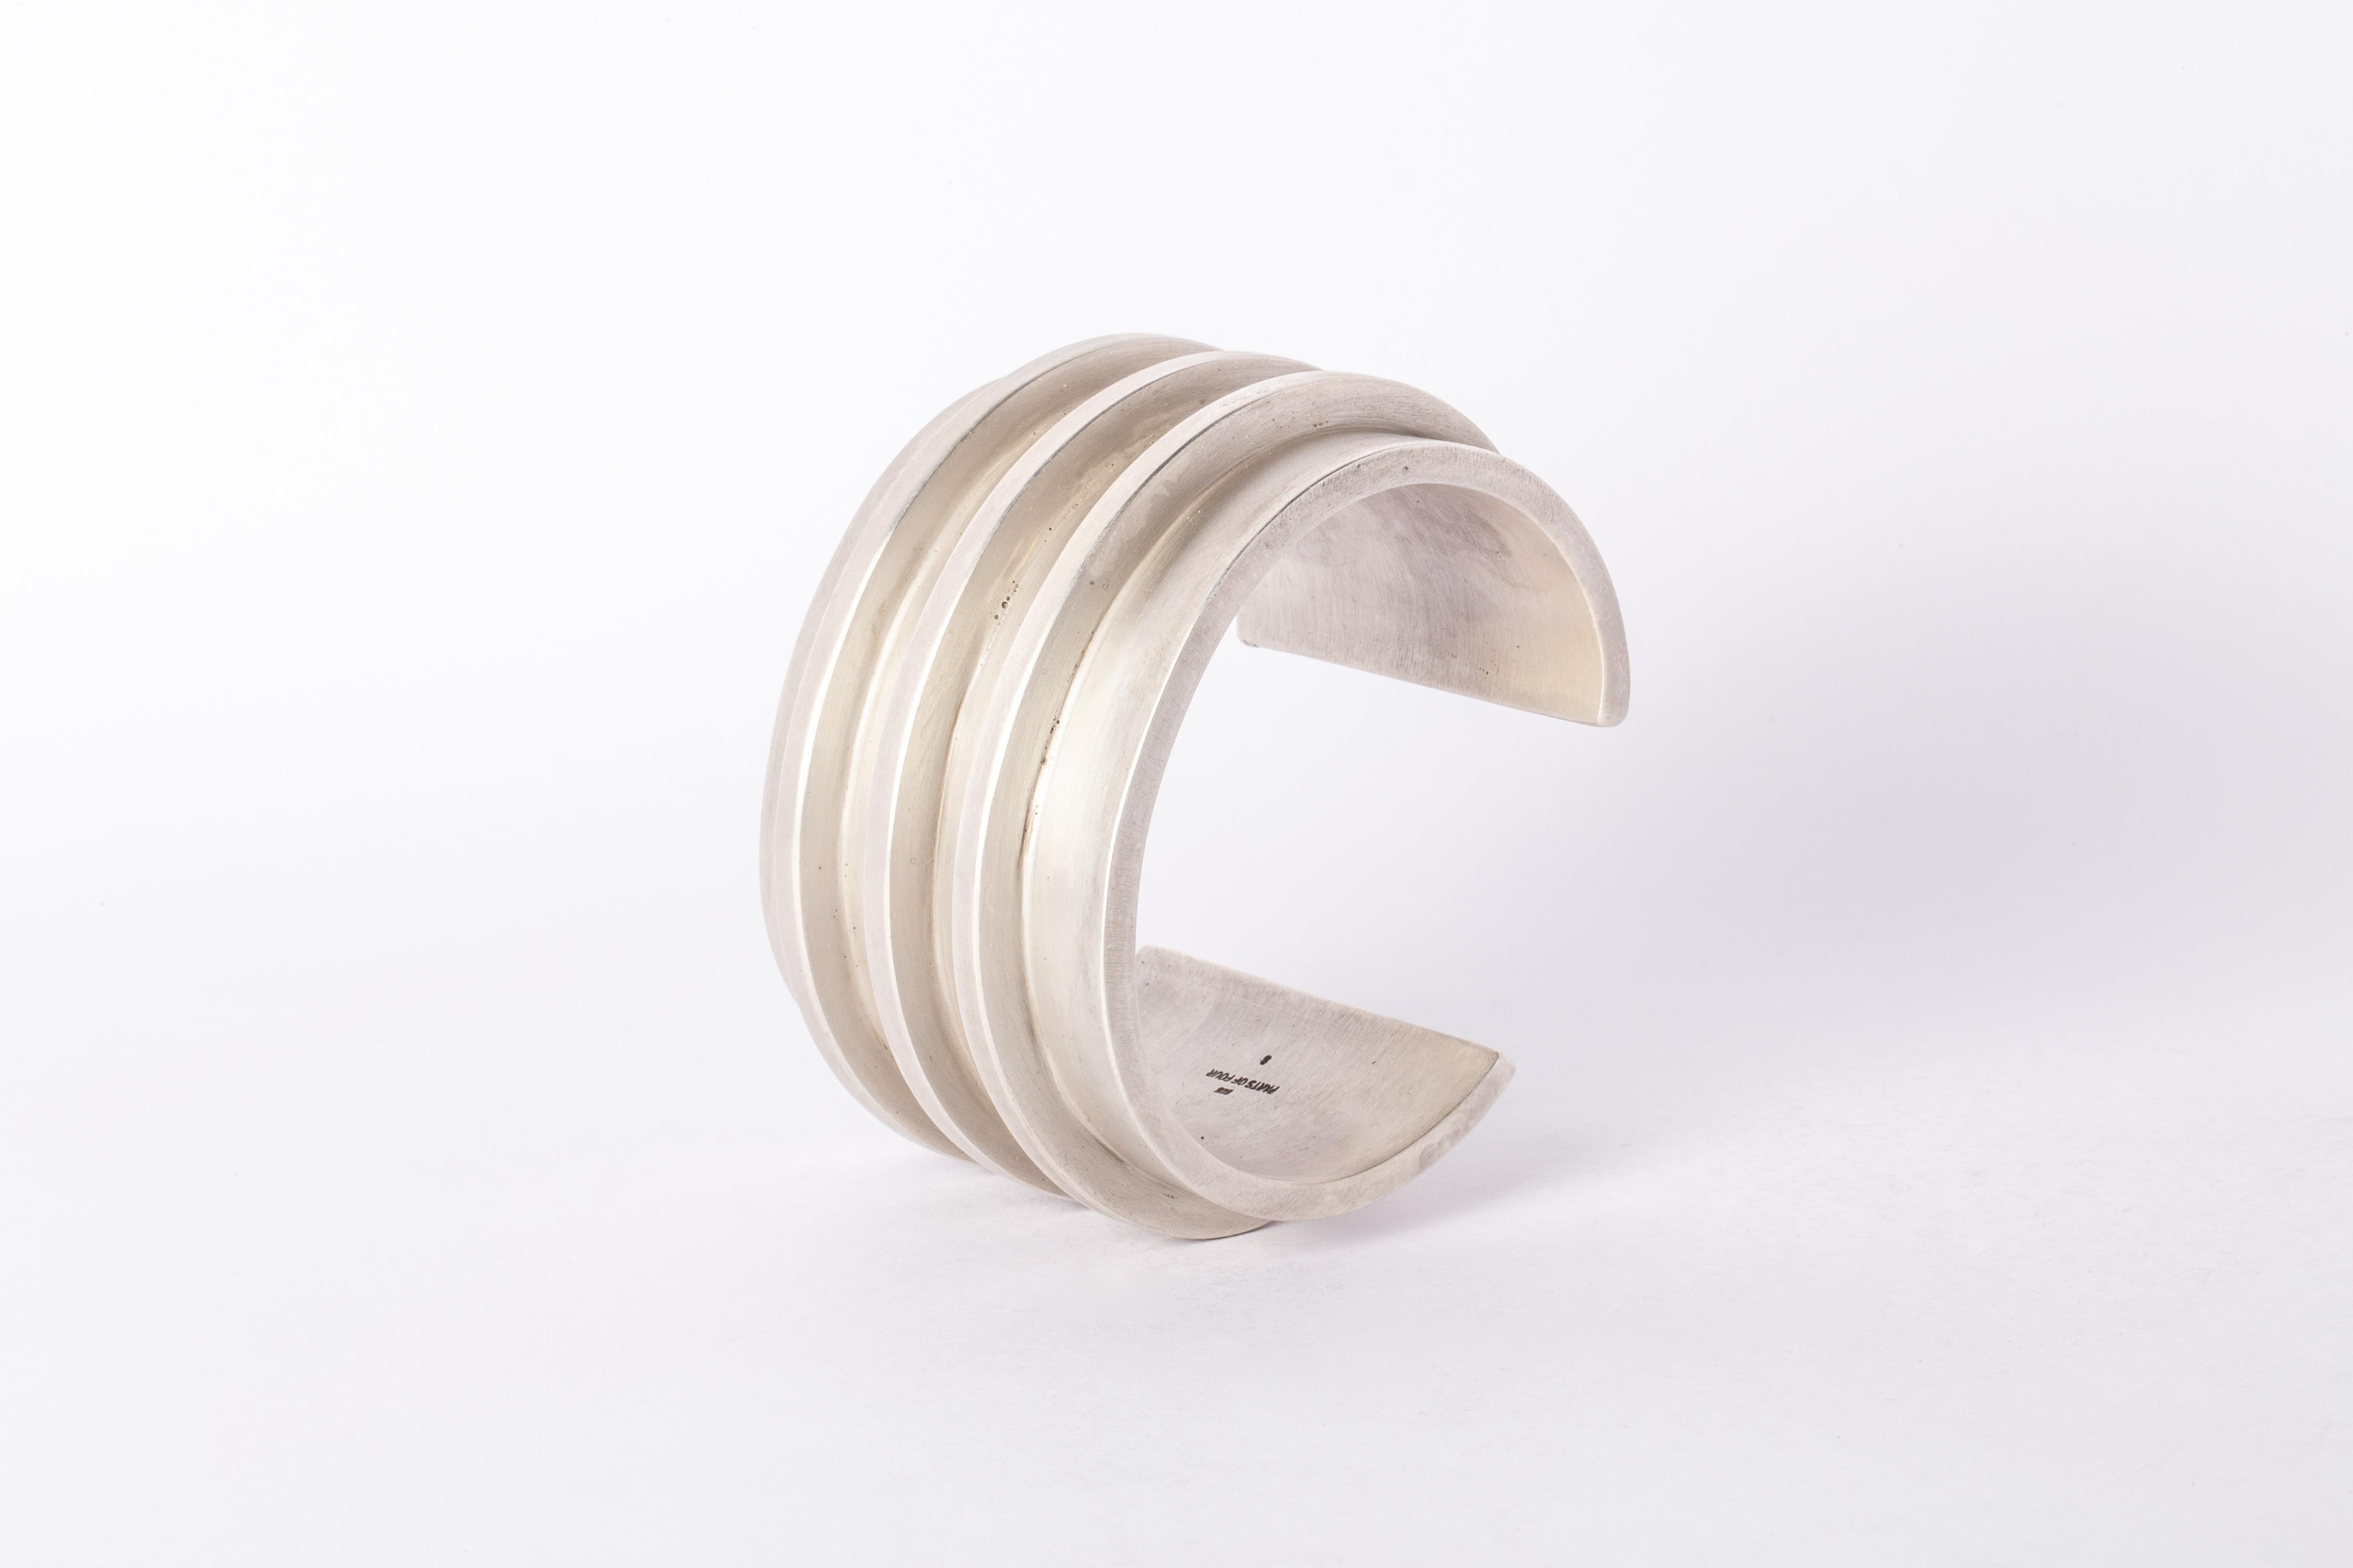 Bracelet in acid treated sterling silver. This piece is 100% hand fabricated from metal plate; cut into sections and soldered together to make the hollow three dimensional form. If sterling silver, the sheet metal is made by hand. The silver is